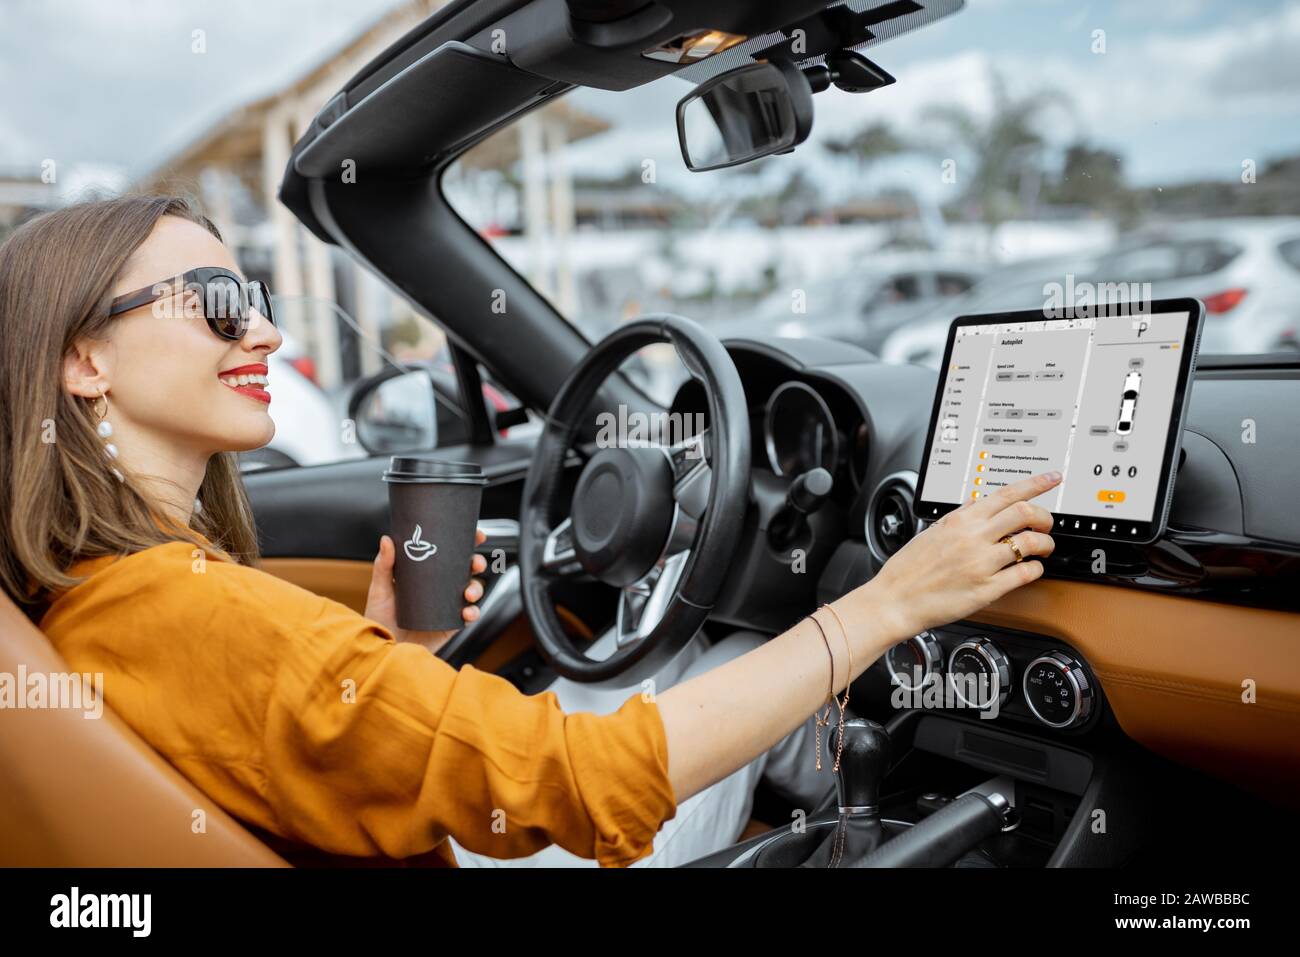 Cheerful woman controlling car with a digital dashboard, switching autopilot mode while driving a cabriolet. Smart car concept Stock Photo